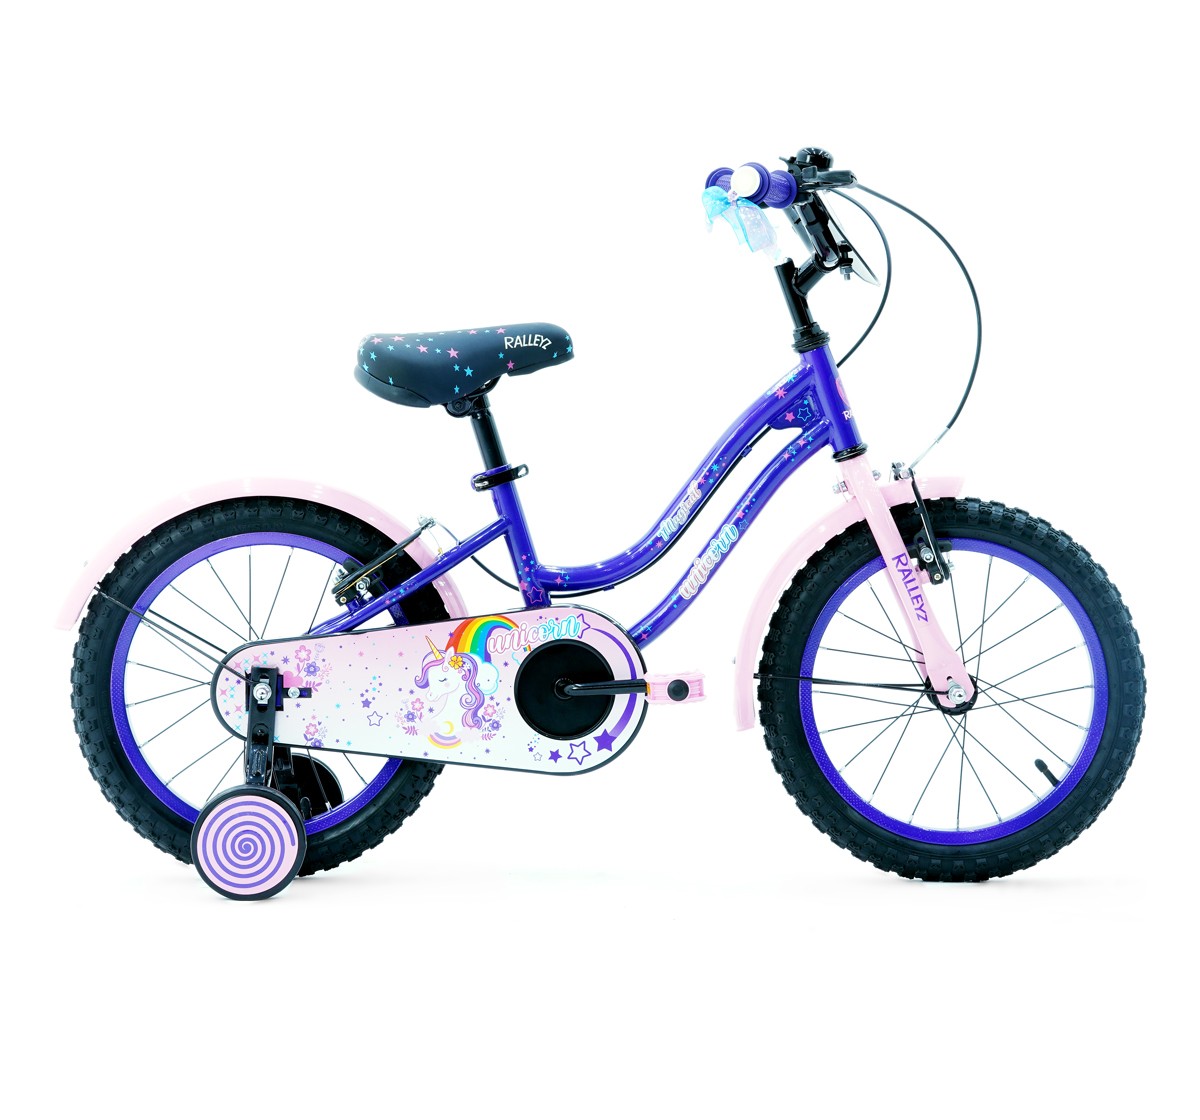 Ralleyz Astra Magical Unicorn Corn 16 Inch, Bicycles For Kids, Multicolour, 5Y+